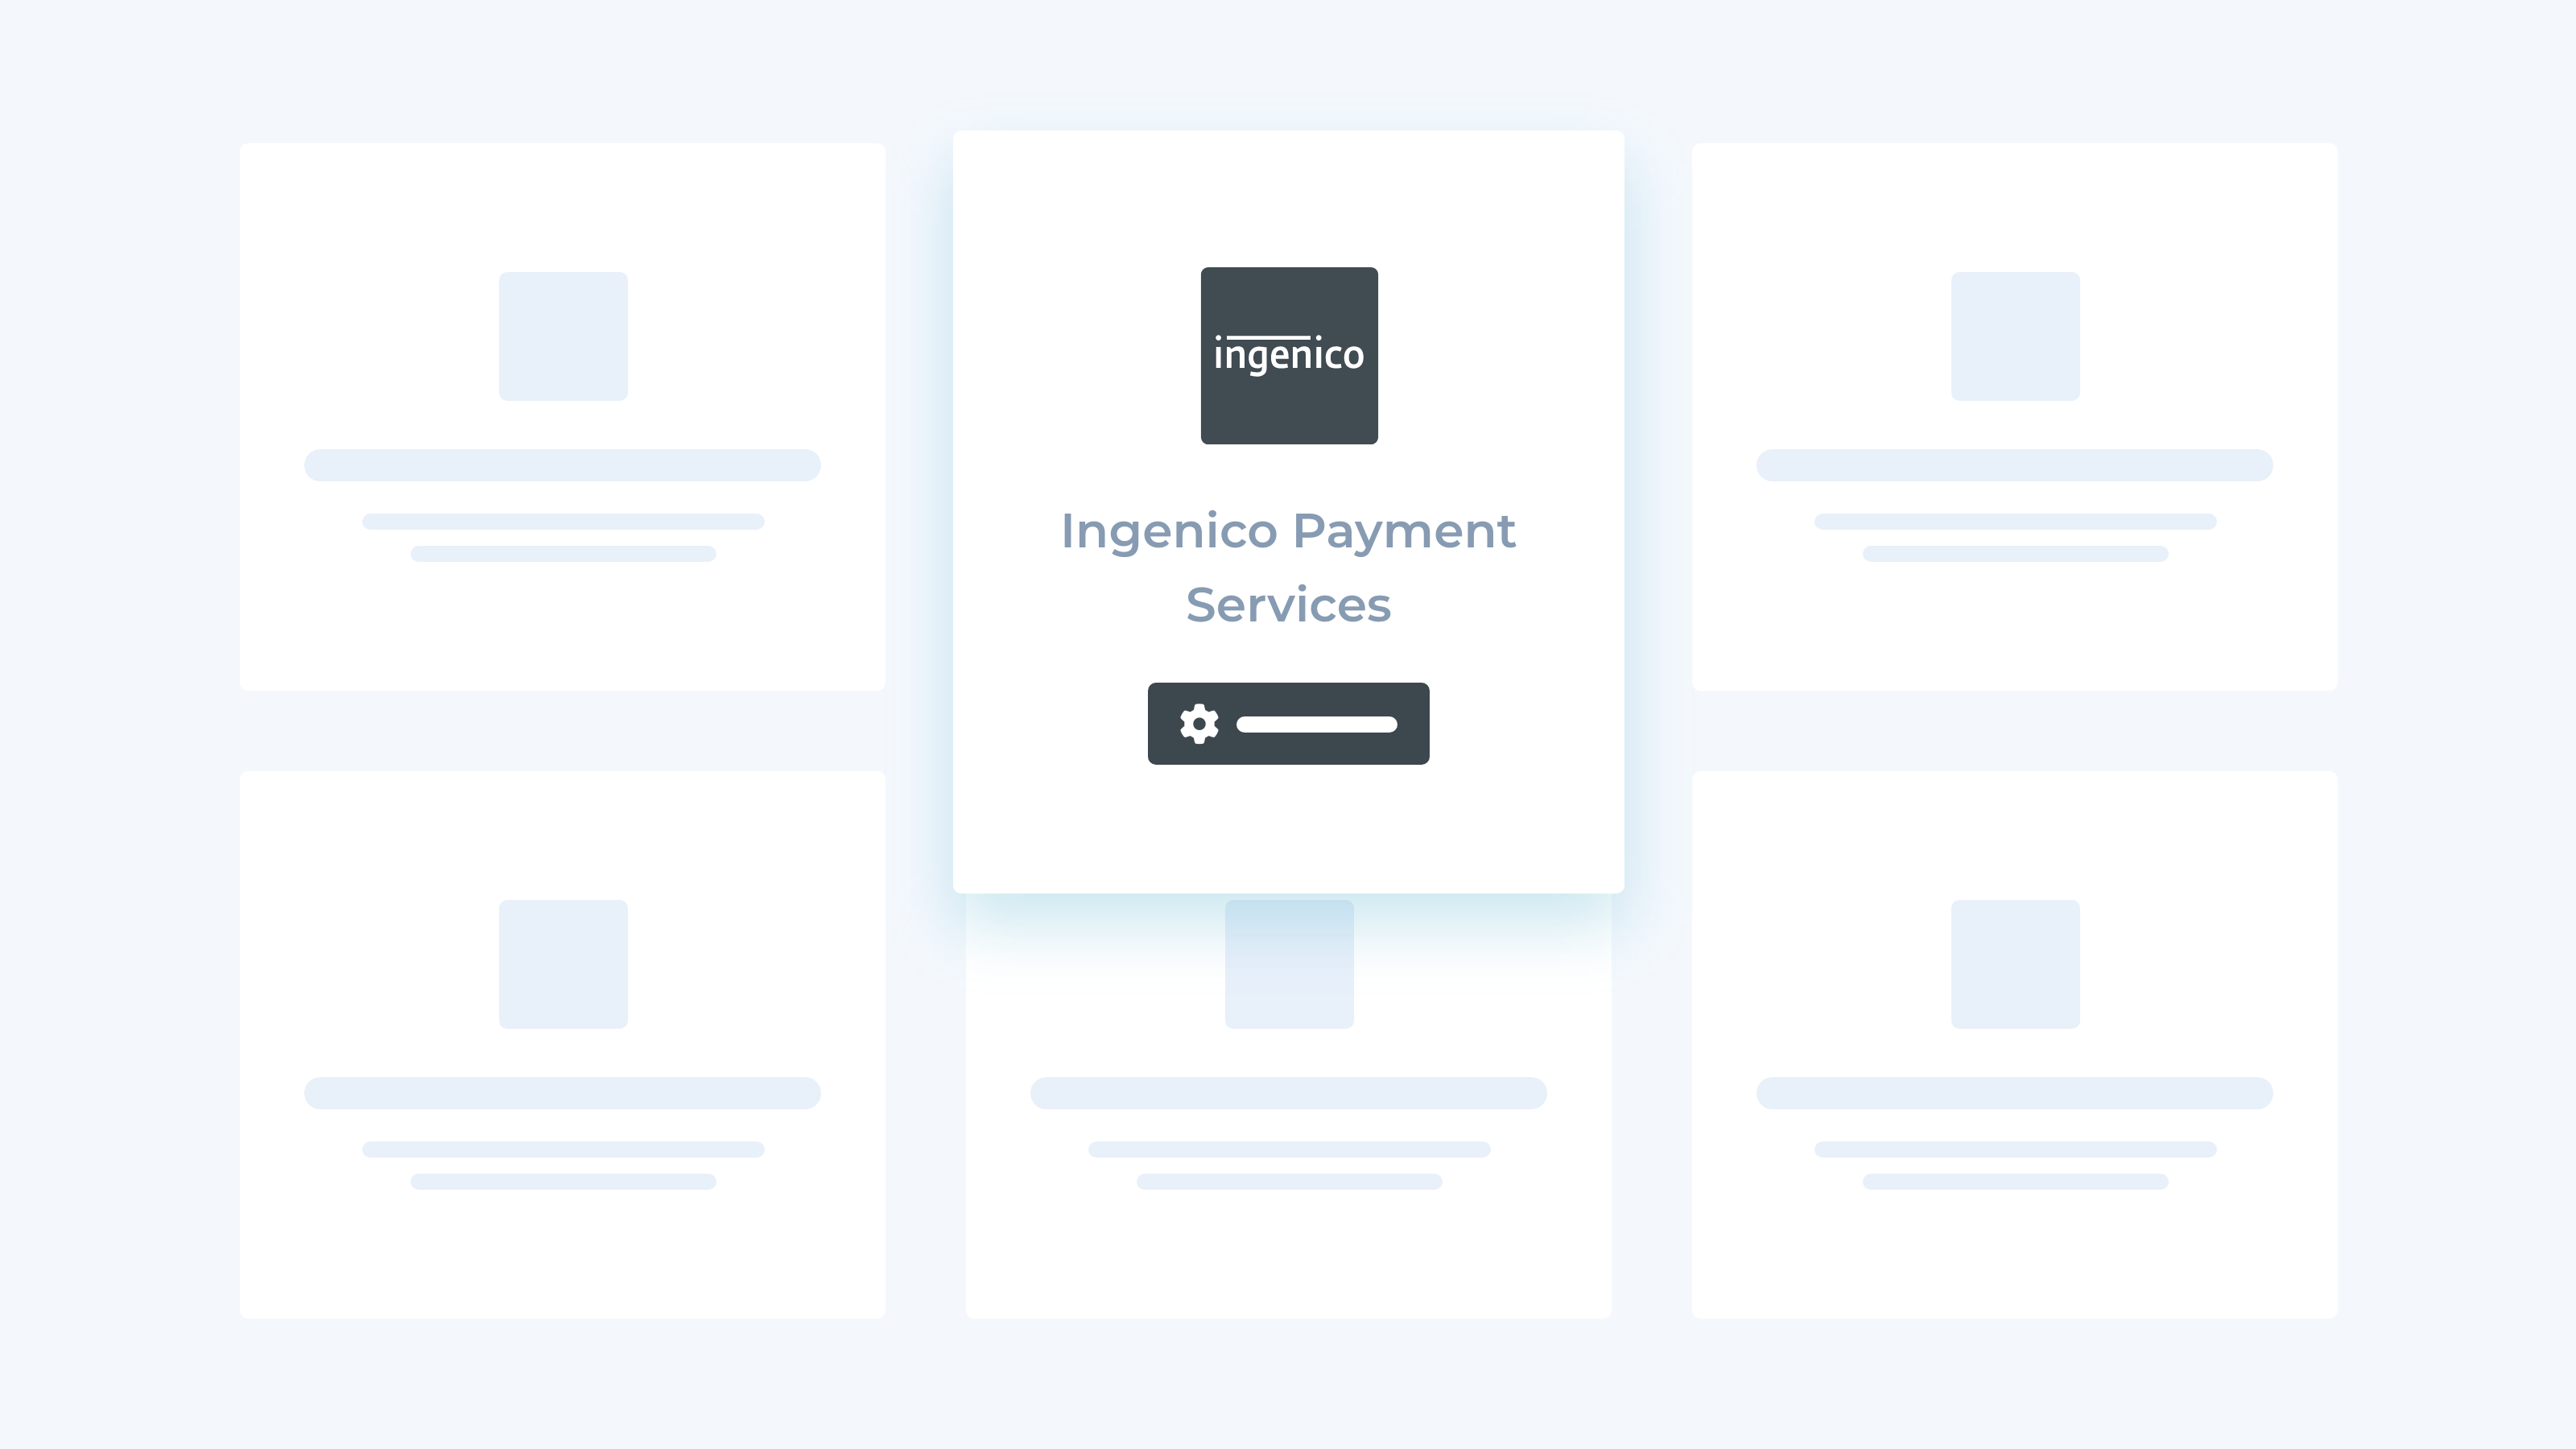 Ingenico Payment Services